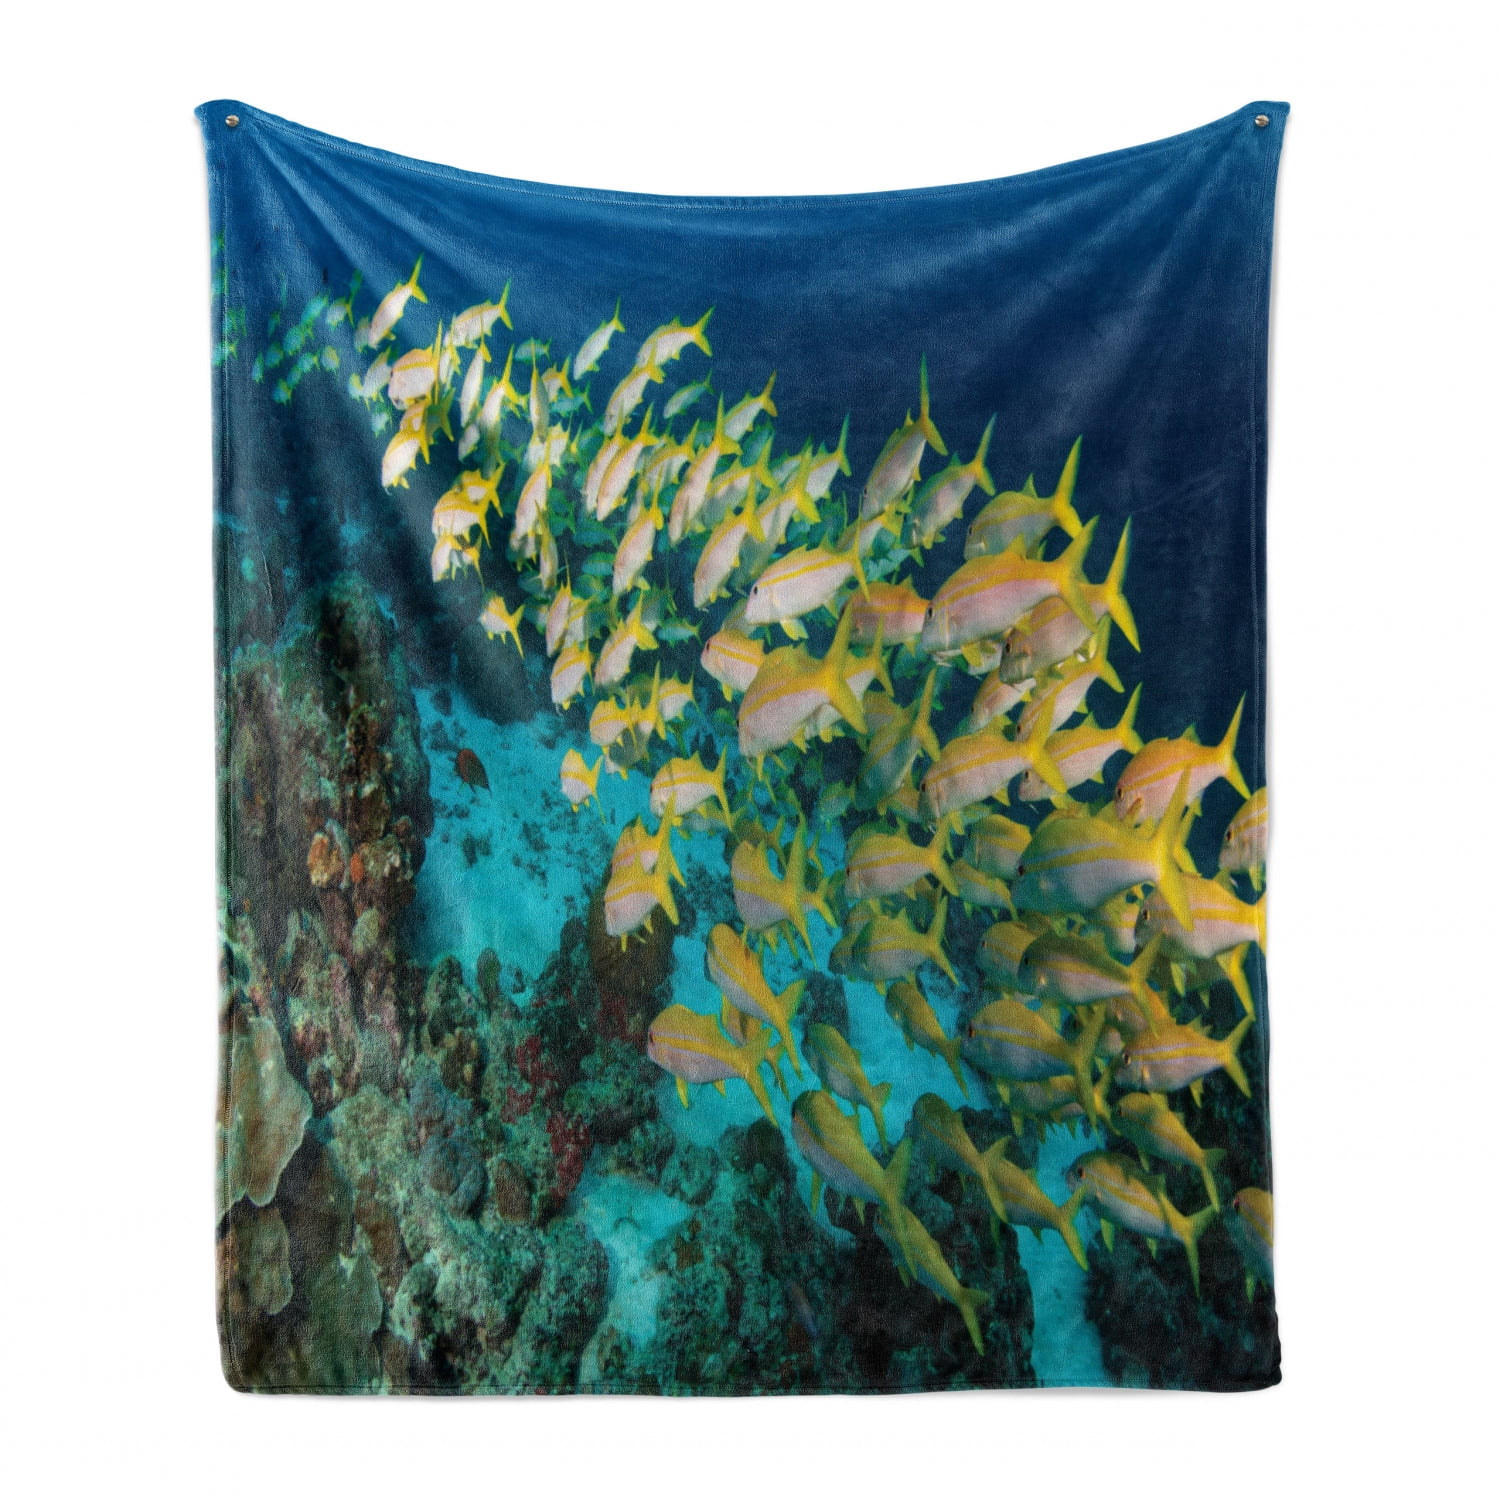 Flannel Fleece Blanket Full Size Underwater Fish Coral Blanket,All-Season Plush Blanket for Couch Bed Travelling Camping Or Kids Adults 60X50 